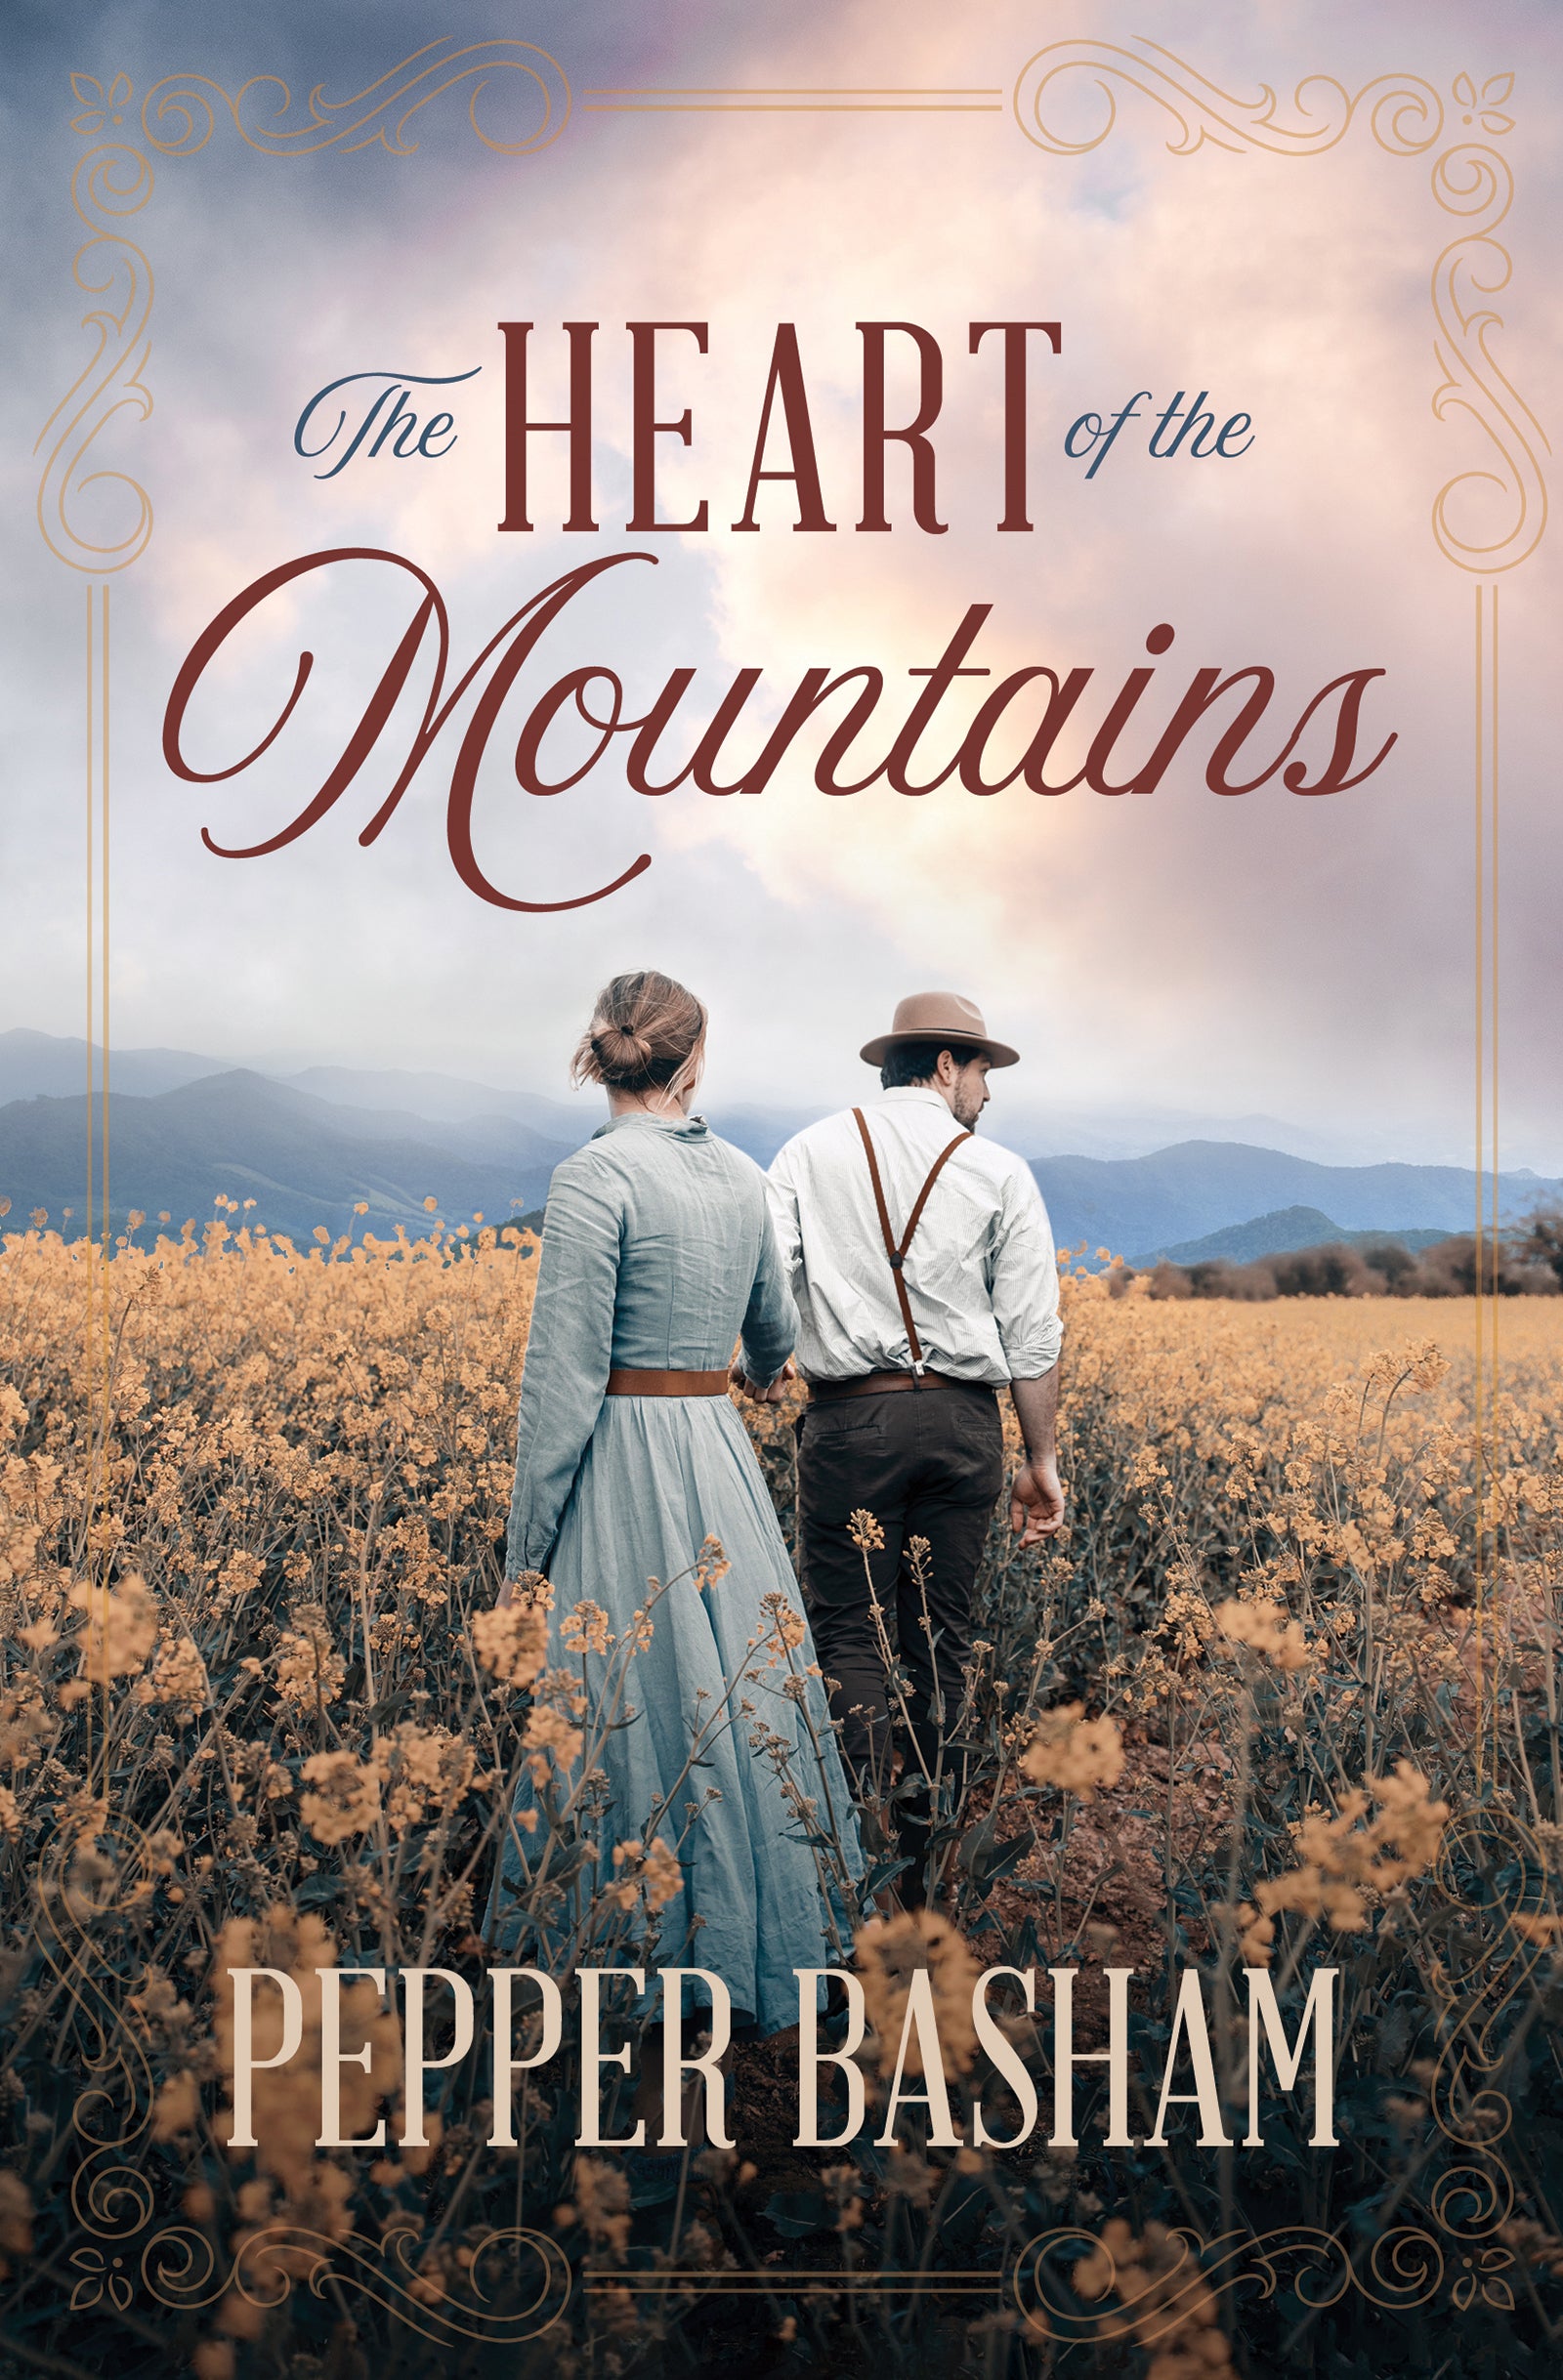 The Heart of the Mountains - The Christian Gift Company